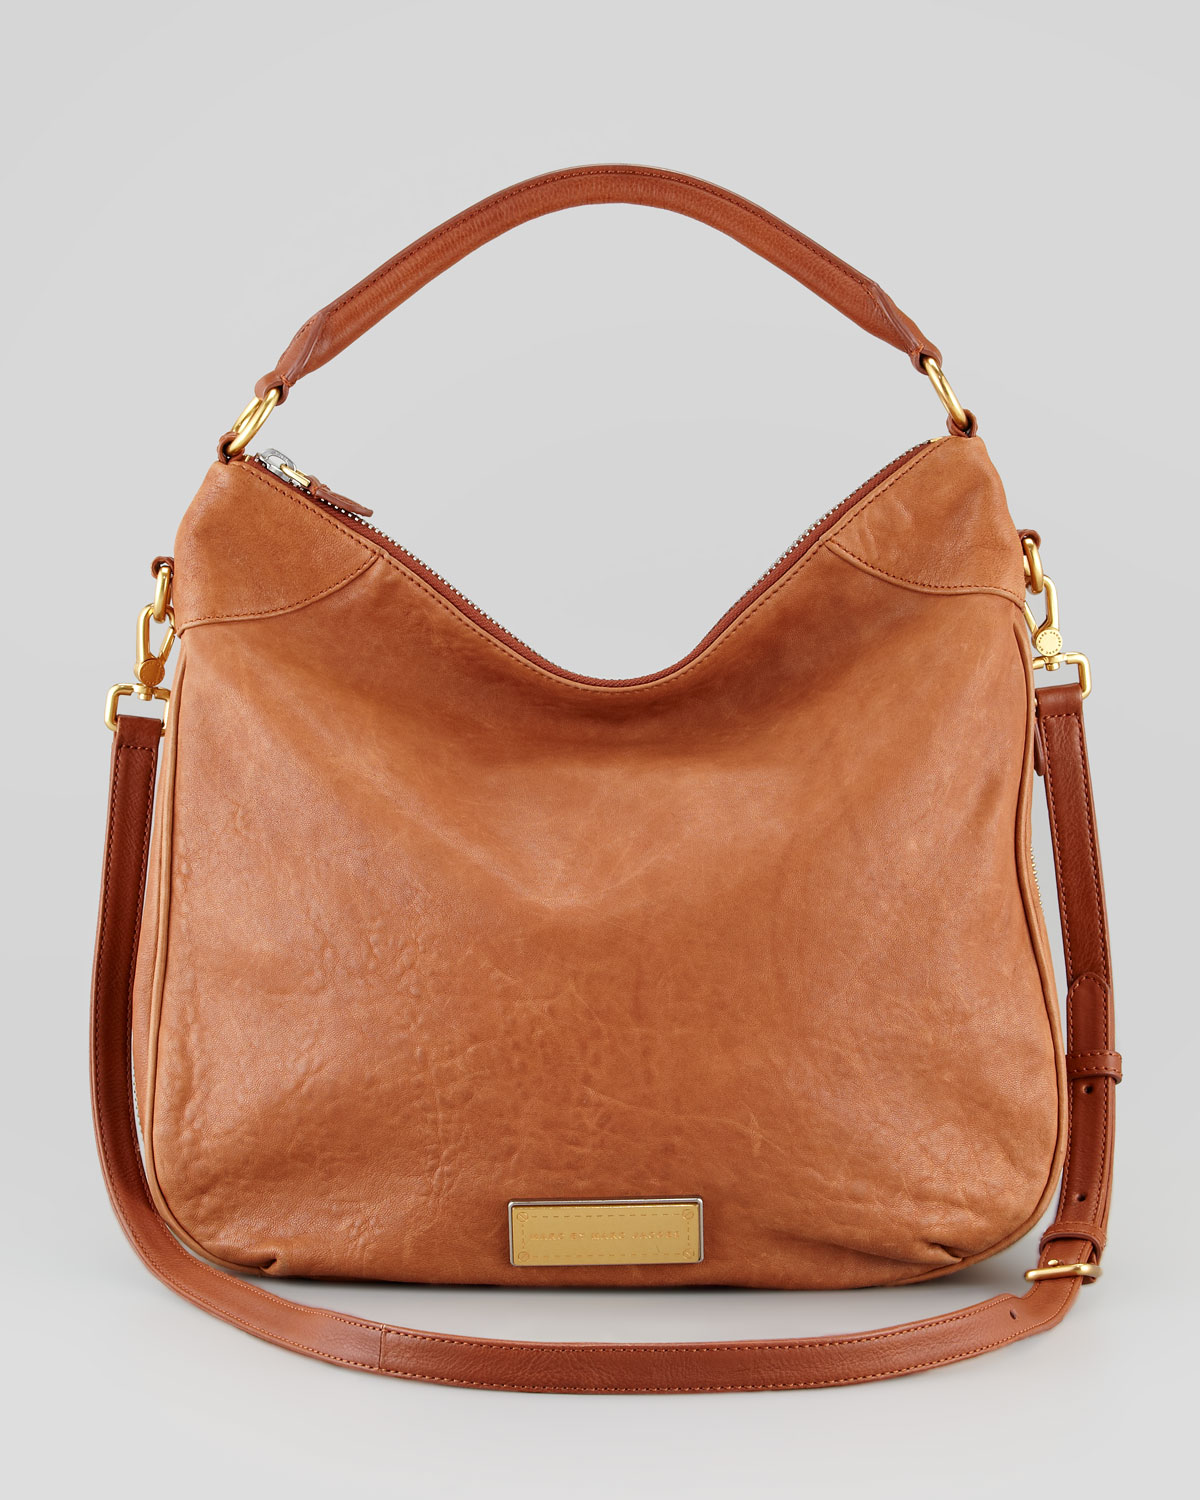 Lyst - Marc by marc jacobs Washed Up Billy Hobo Bag in Brown